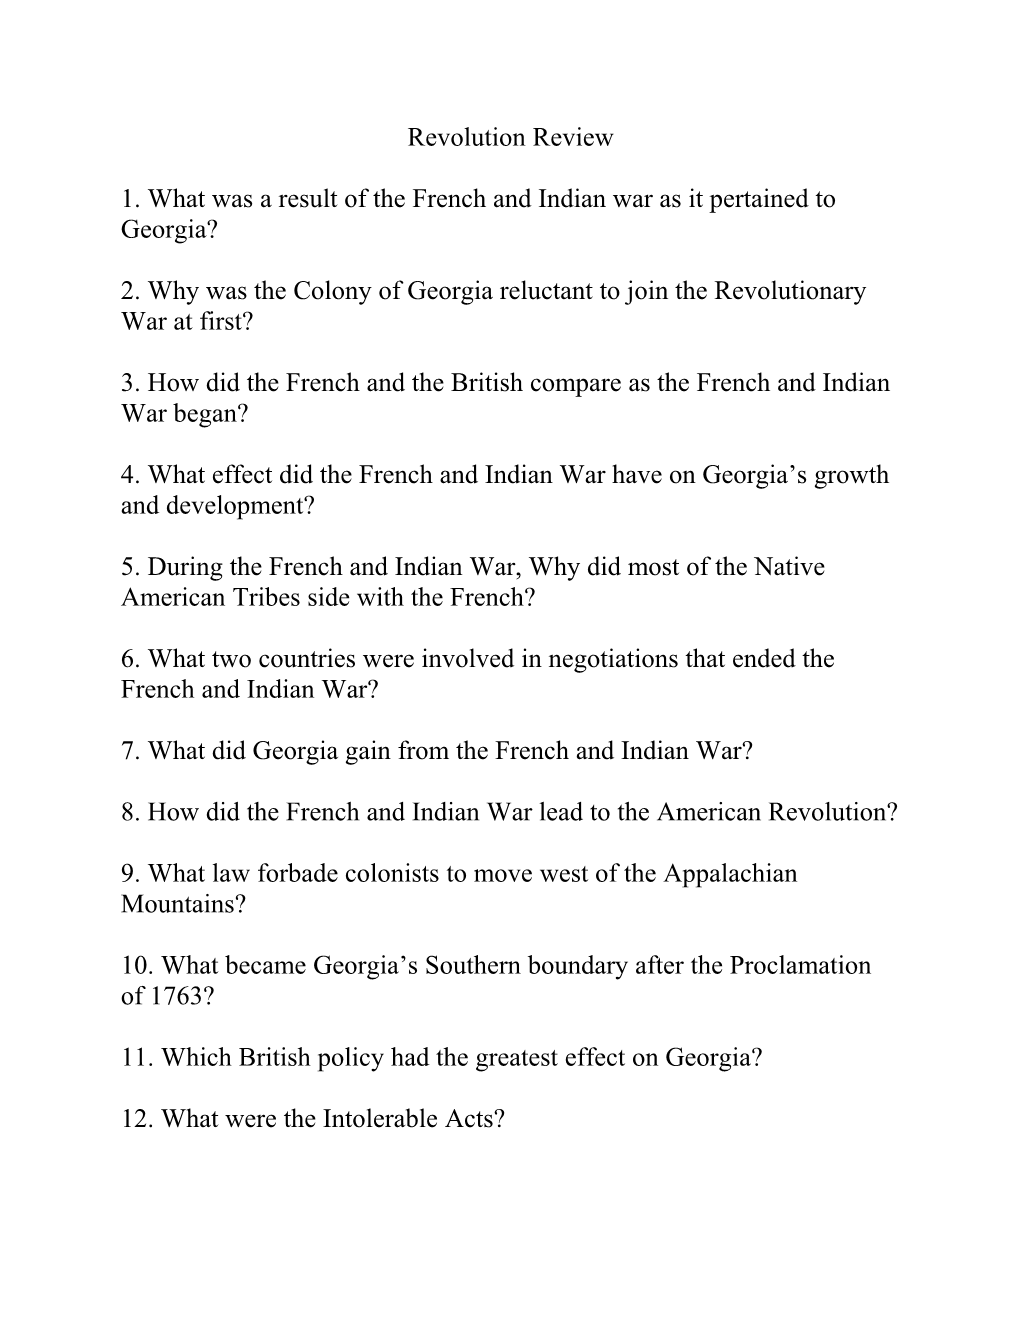 1.What Was a Result of the French and Indian War As It Pertained to Georgia?